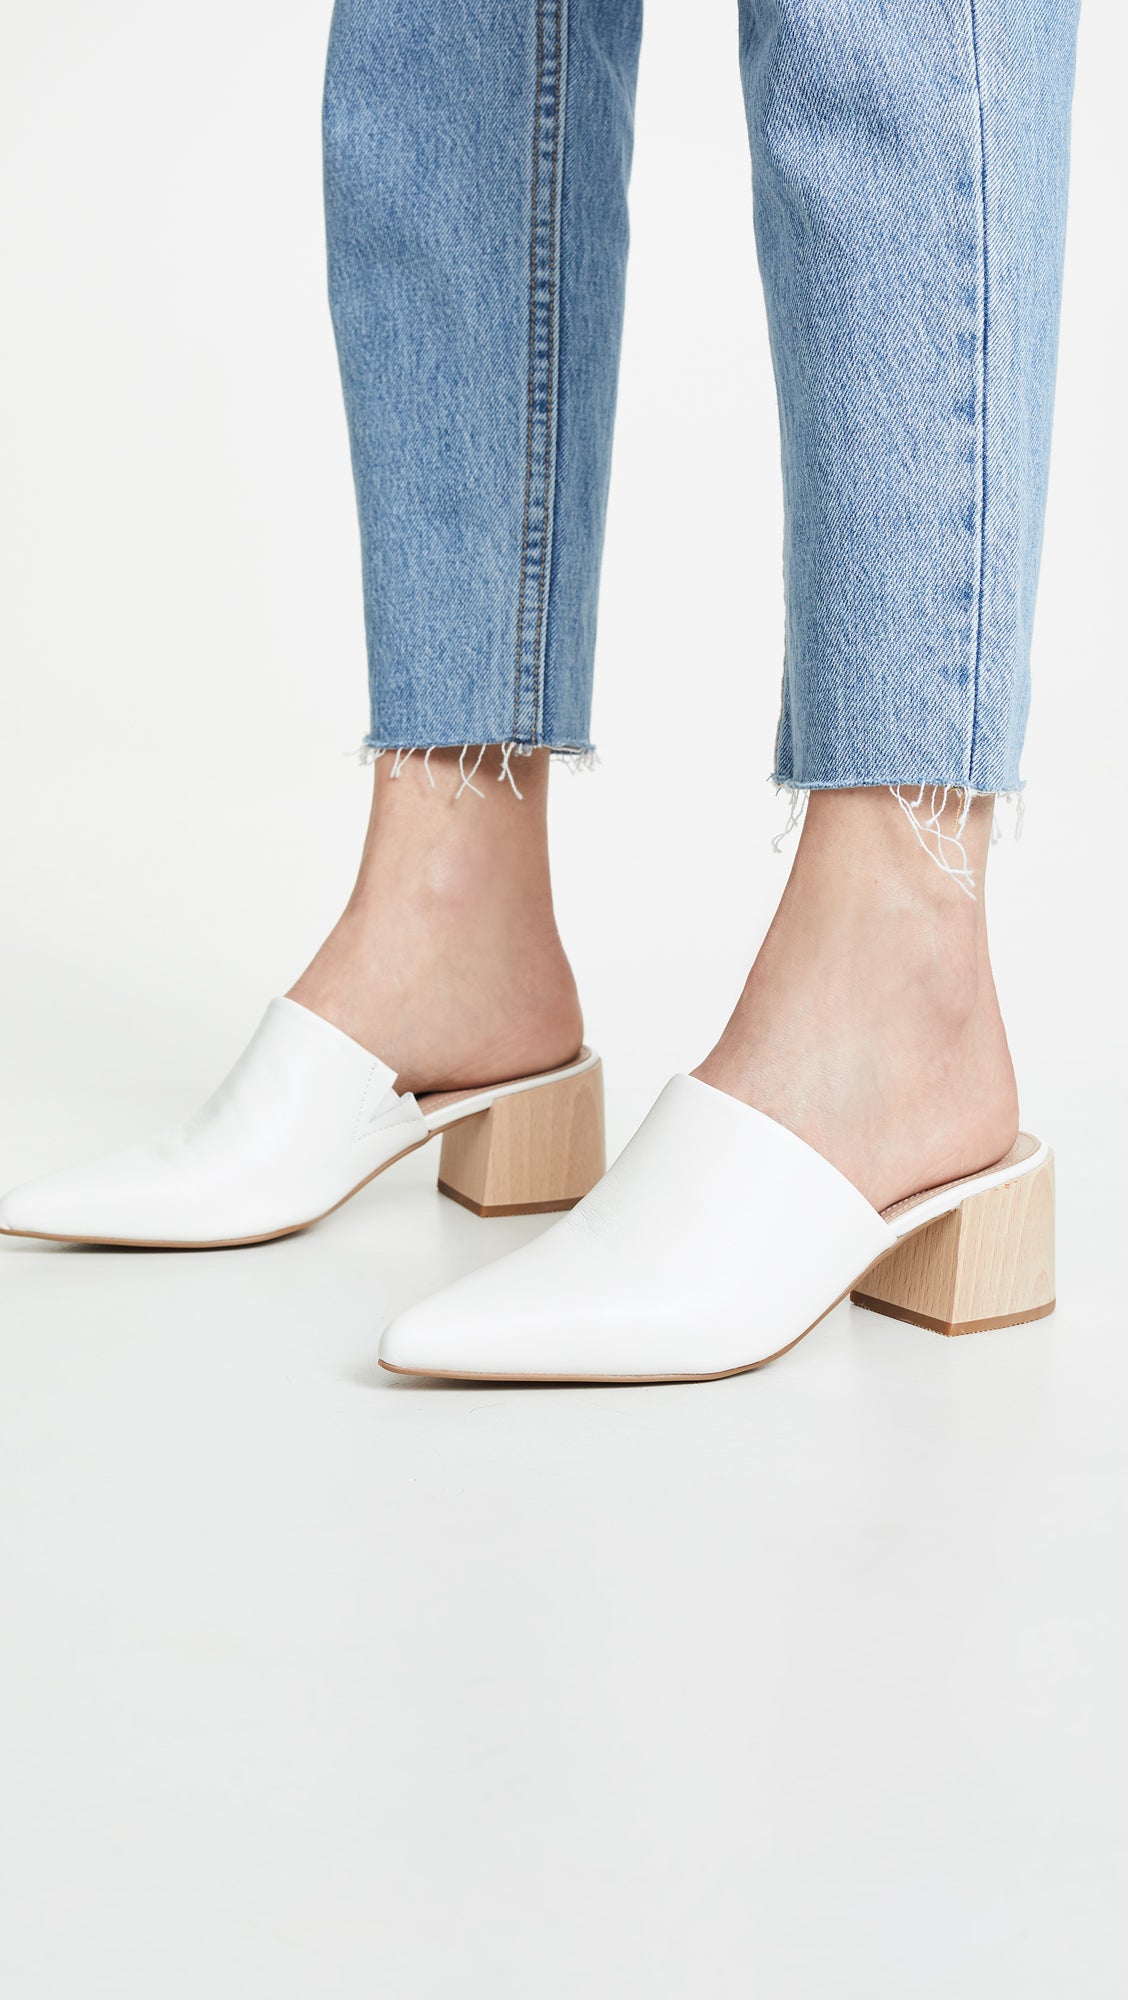 Shopbop's Designer Shoe Sale Is What We've All Been Waiting For